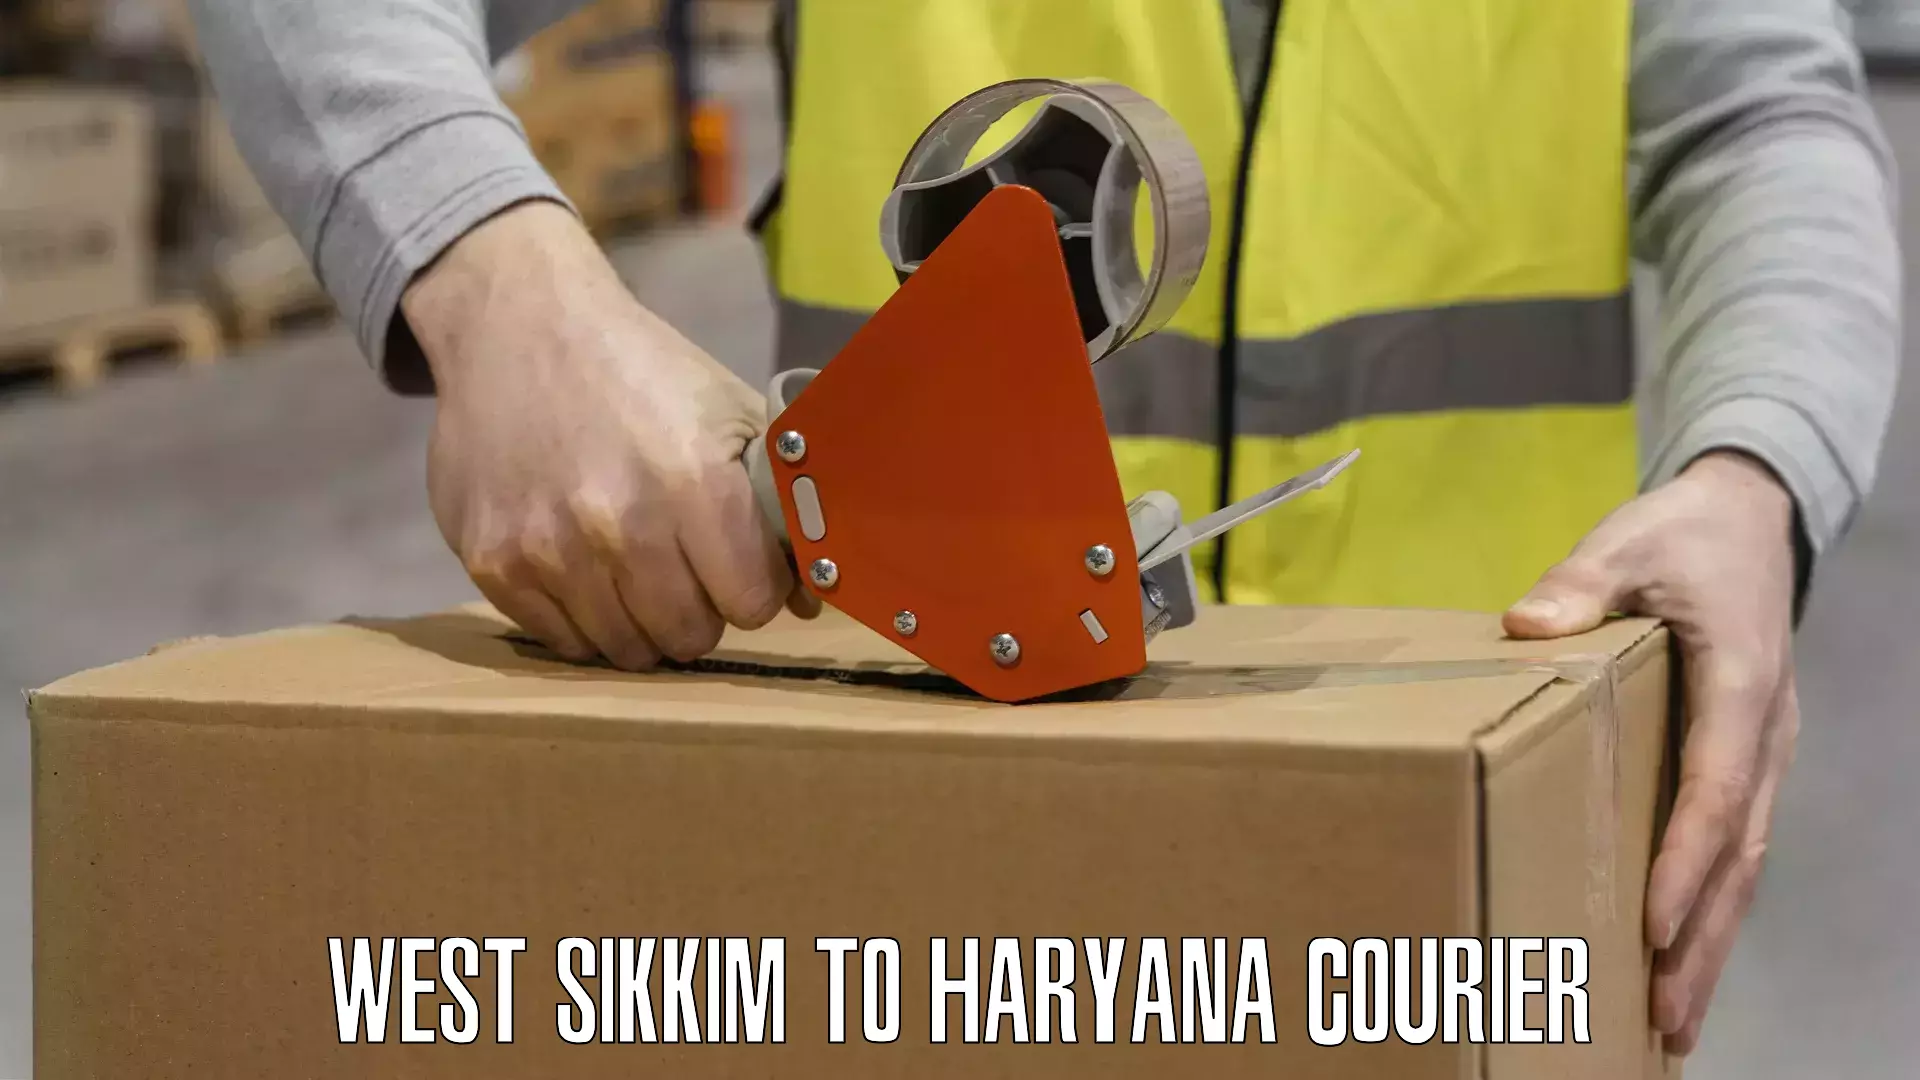 Professional courier services West Sikkim to Haryana